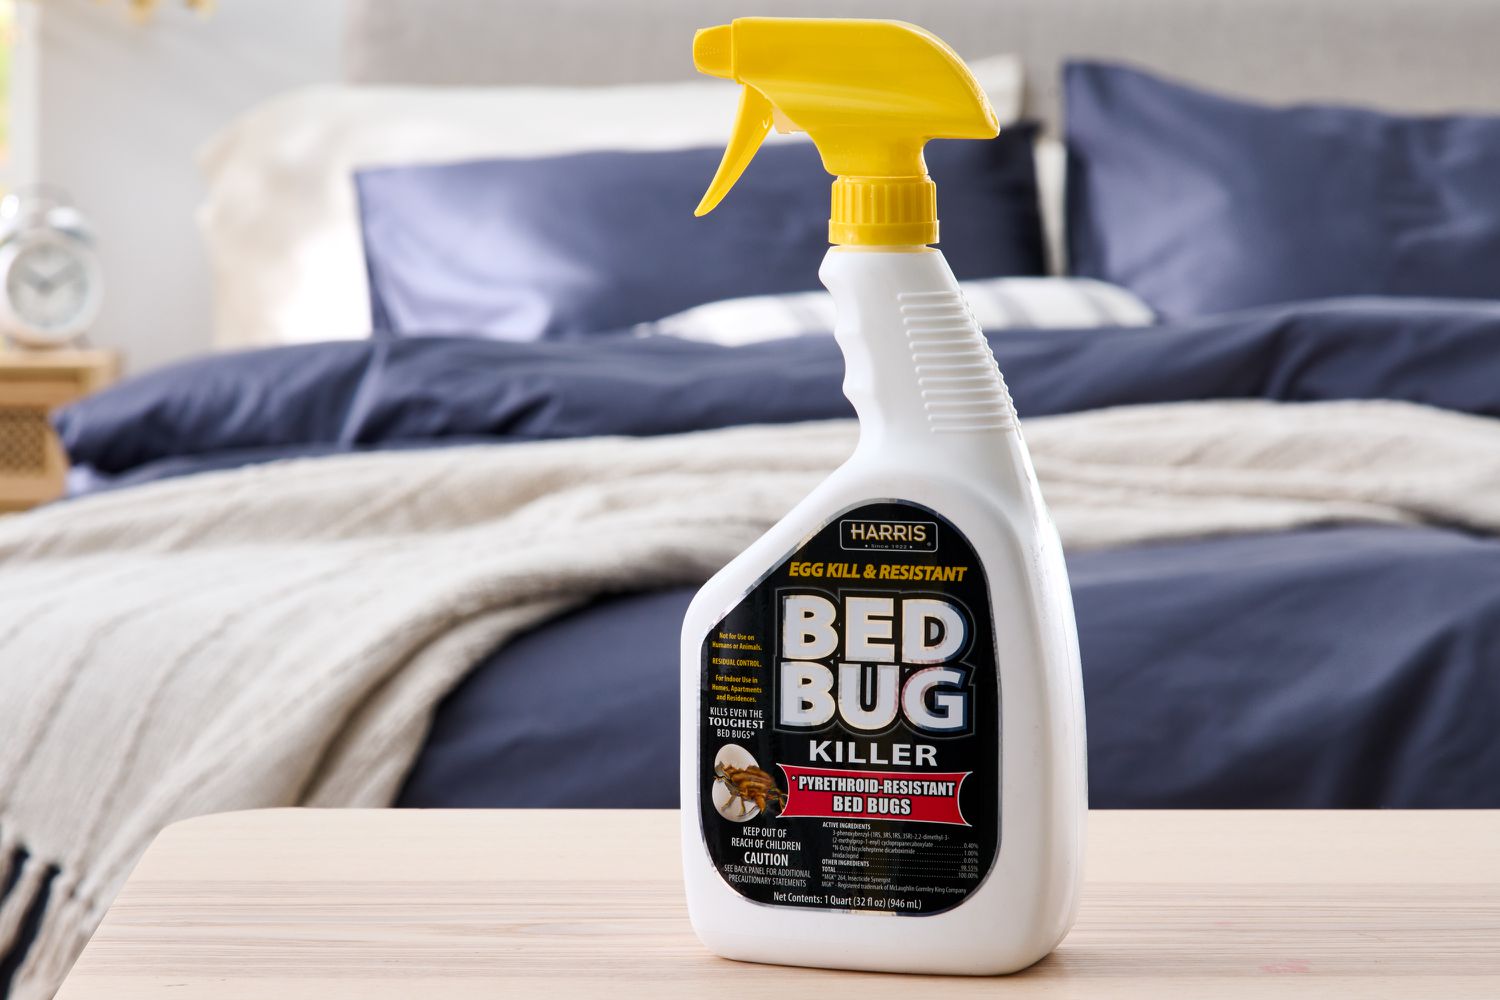 What Sprays Are Effective Against Bed Bugs